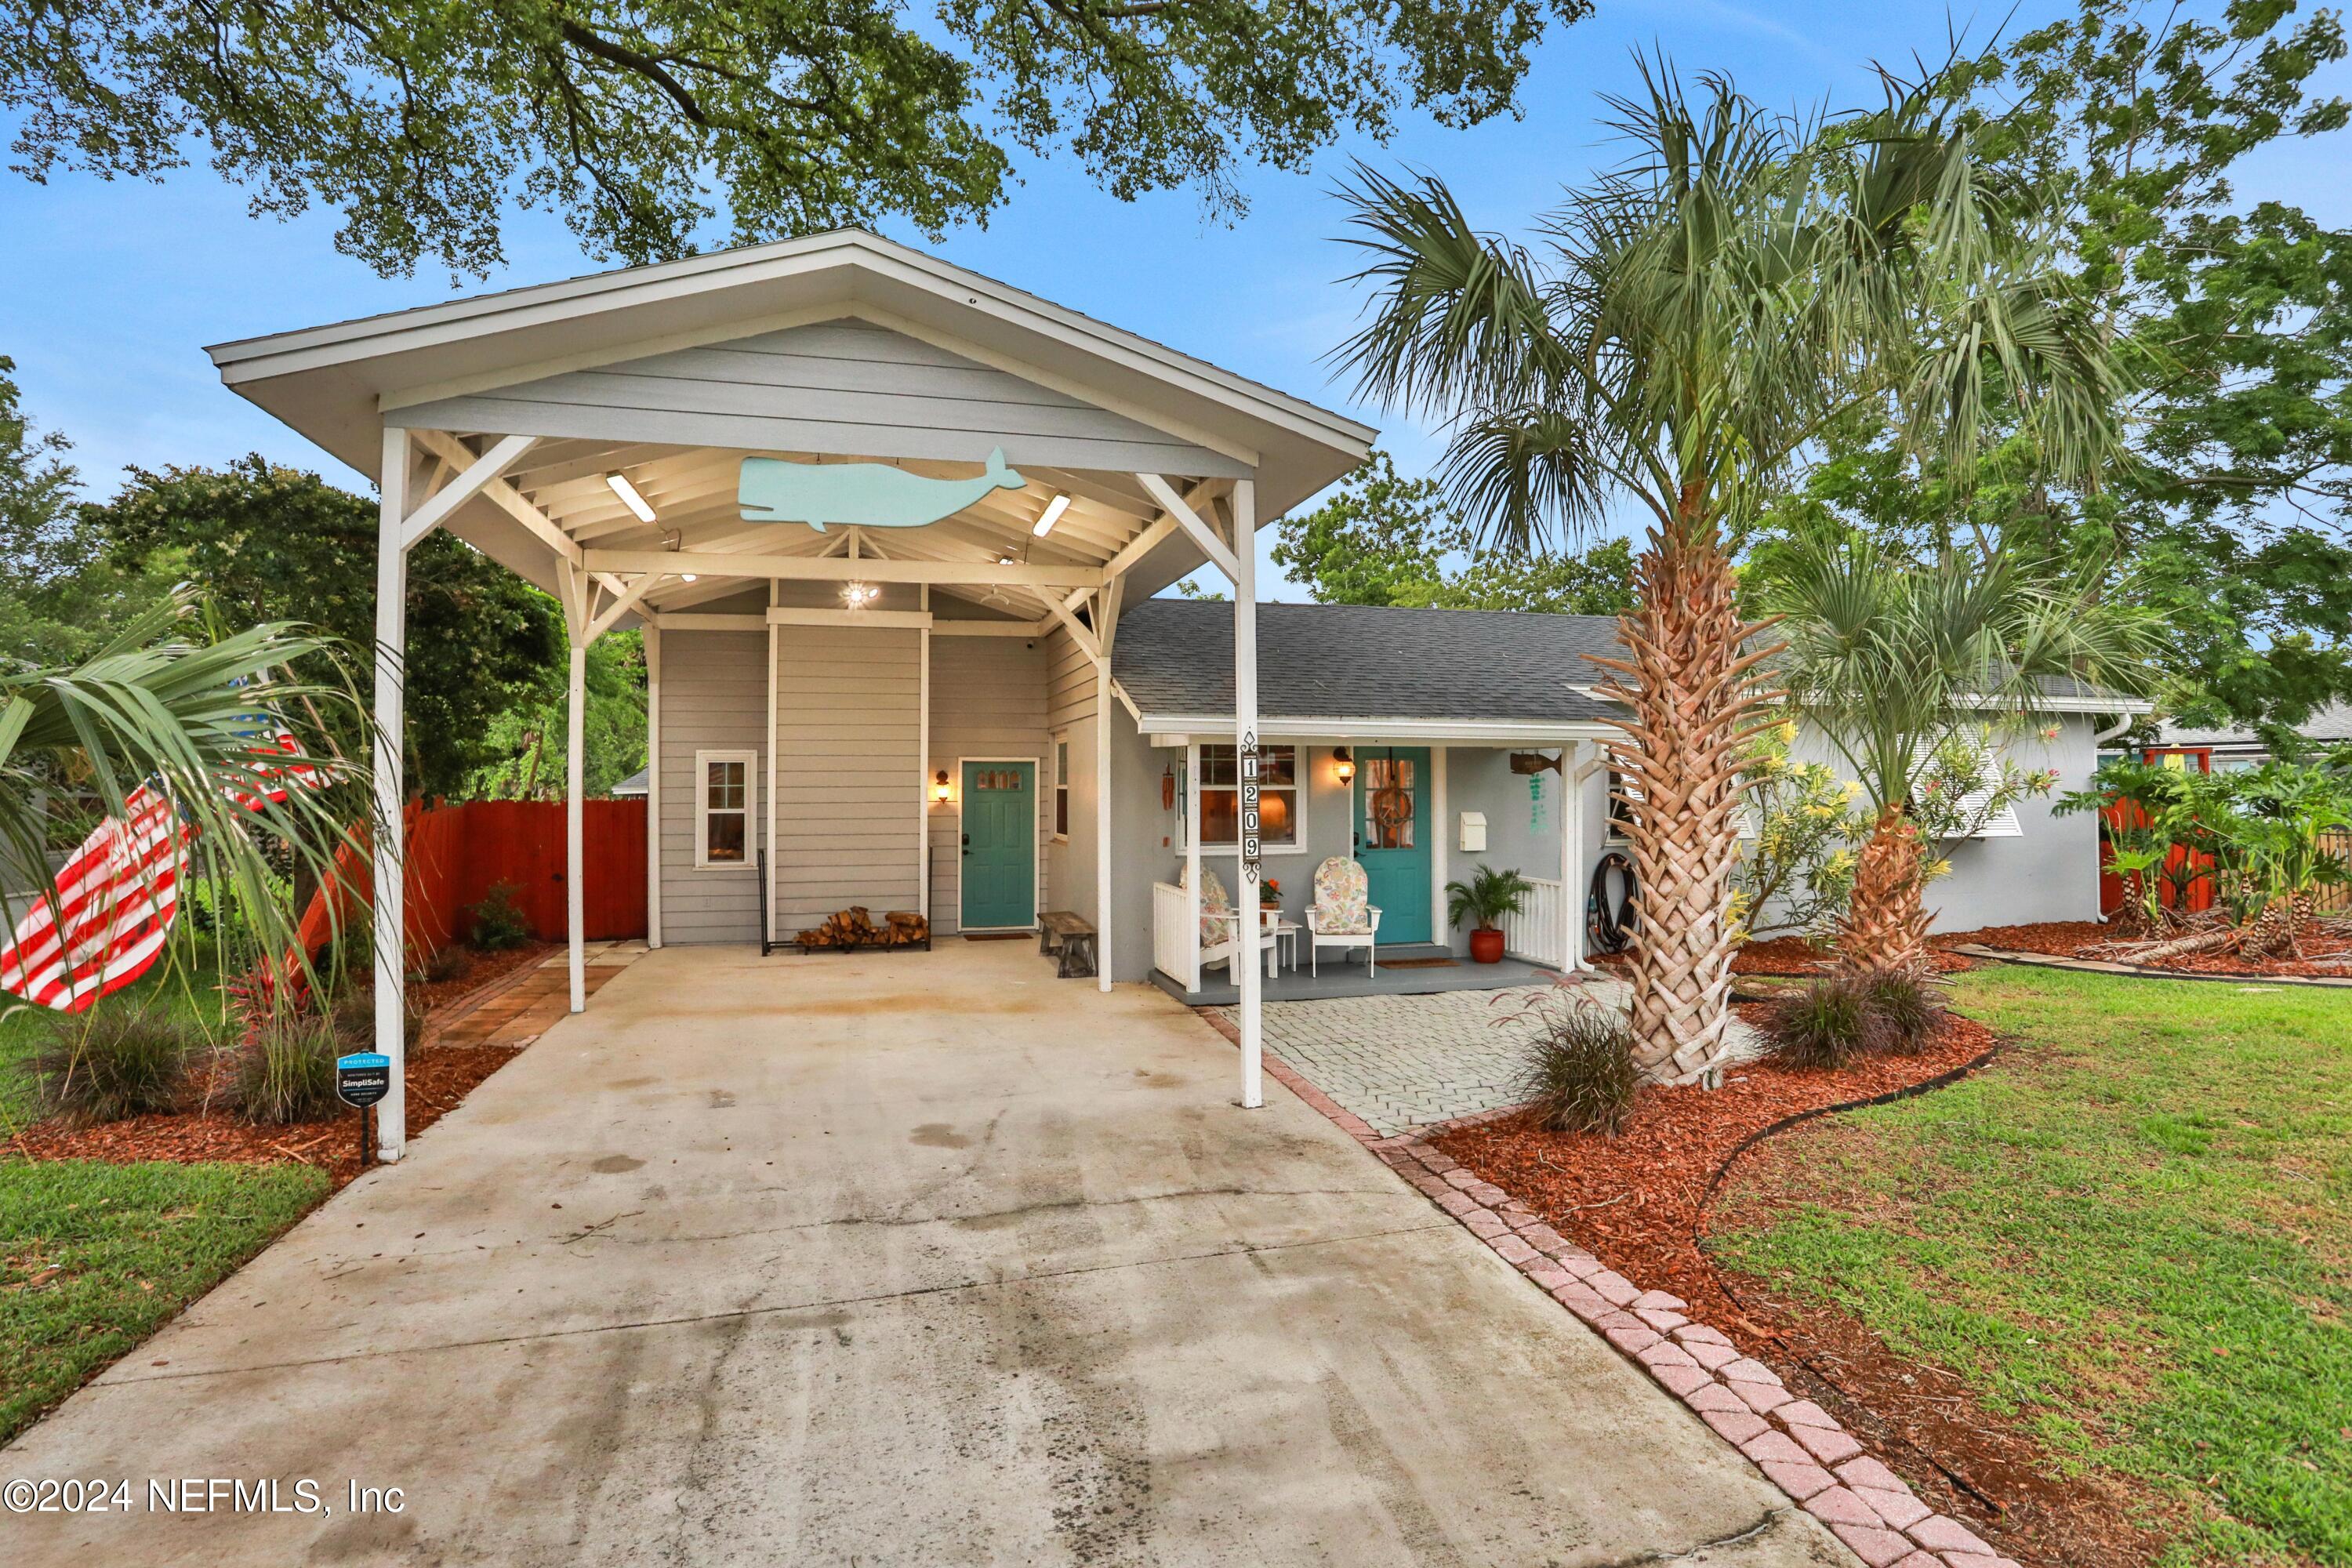 Jacksonville Beach, FL home for sale located at 1209 8th Street N, Jacksonville Beach, FL 32250